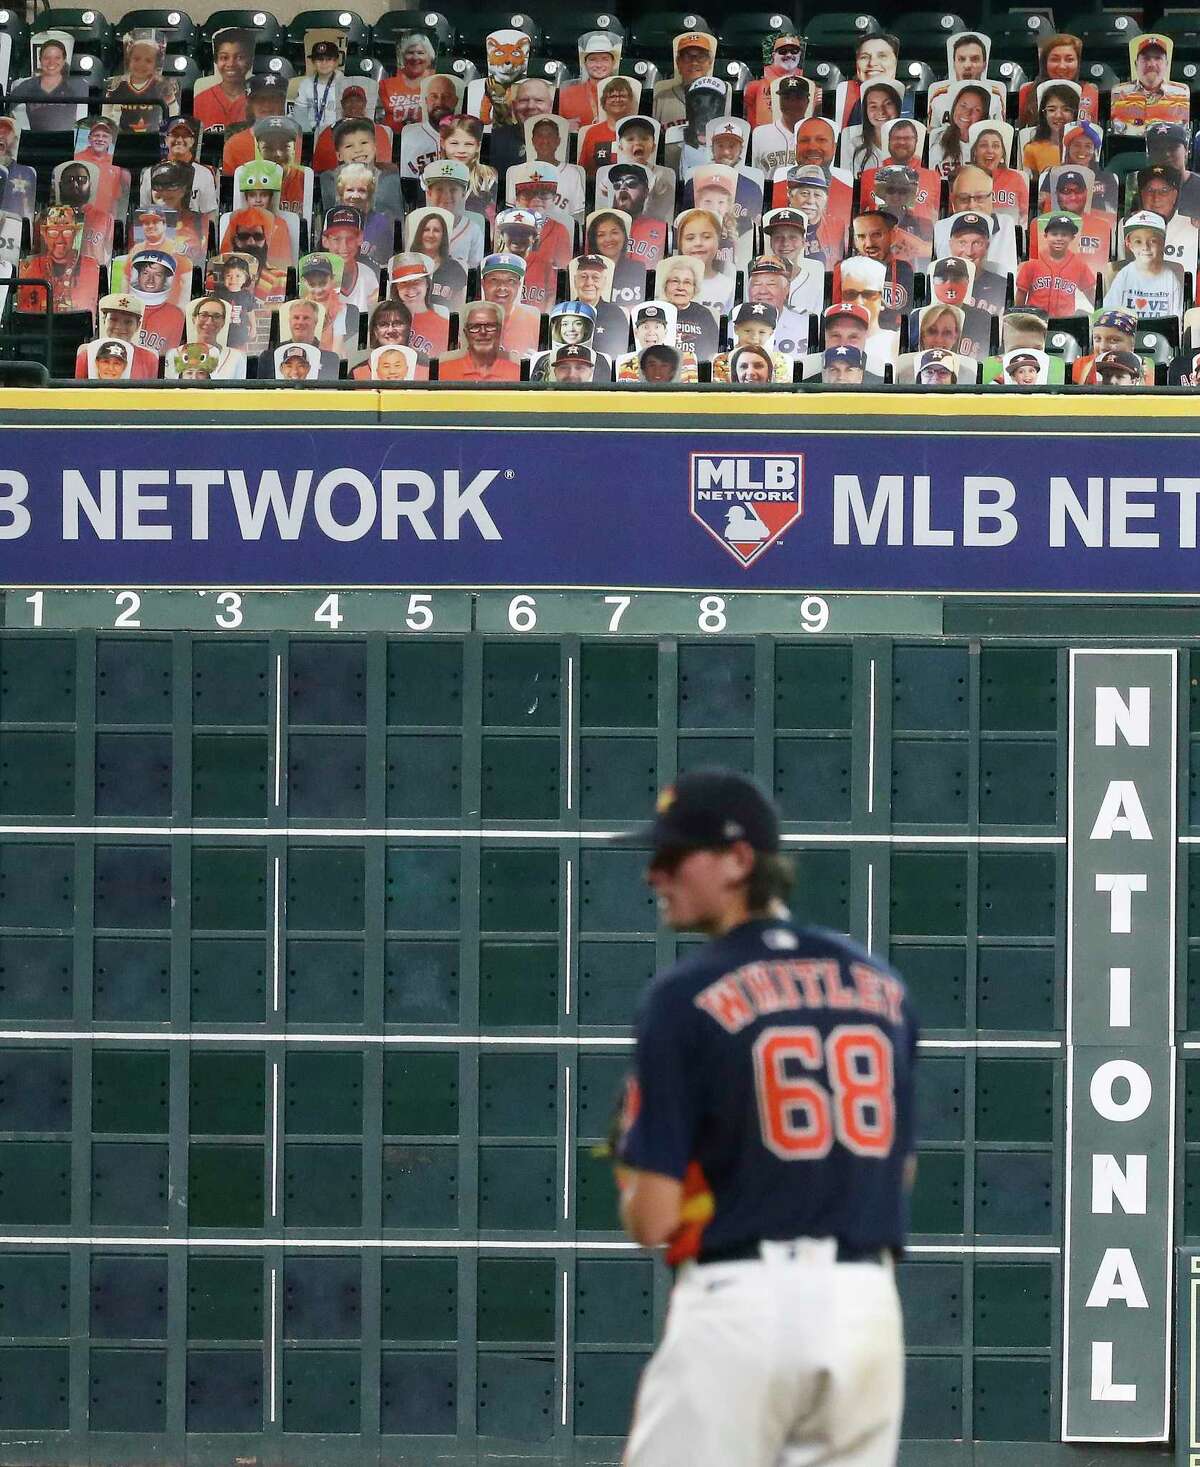 Houston Astros pitcher Forrest Whitley pitches with cardboard cutouts of fans in the Crawford Boxes behind him during an intrasquad game during the Astros summer camp at Minute Maid Park, Wednesday, July 22, 2020, in Houston.